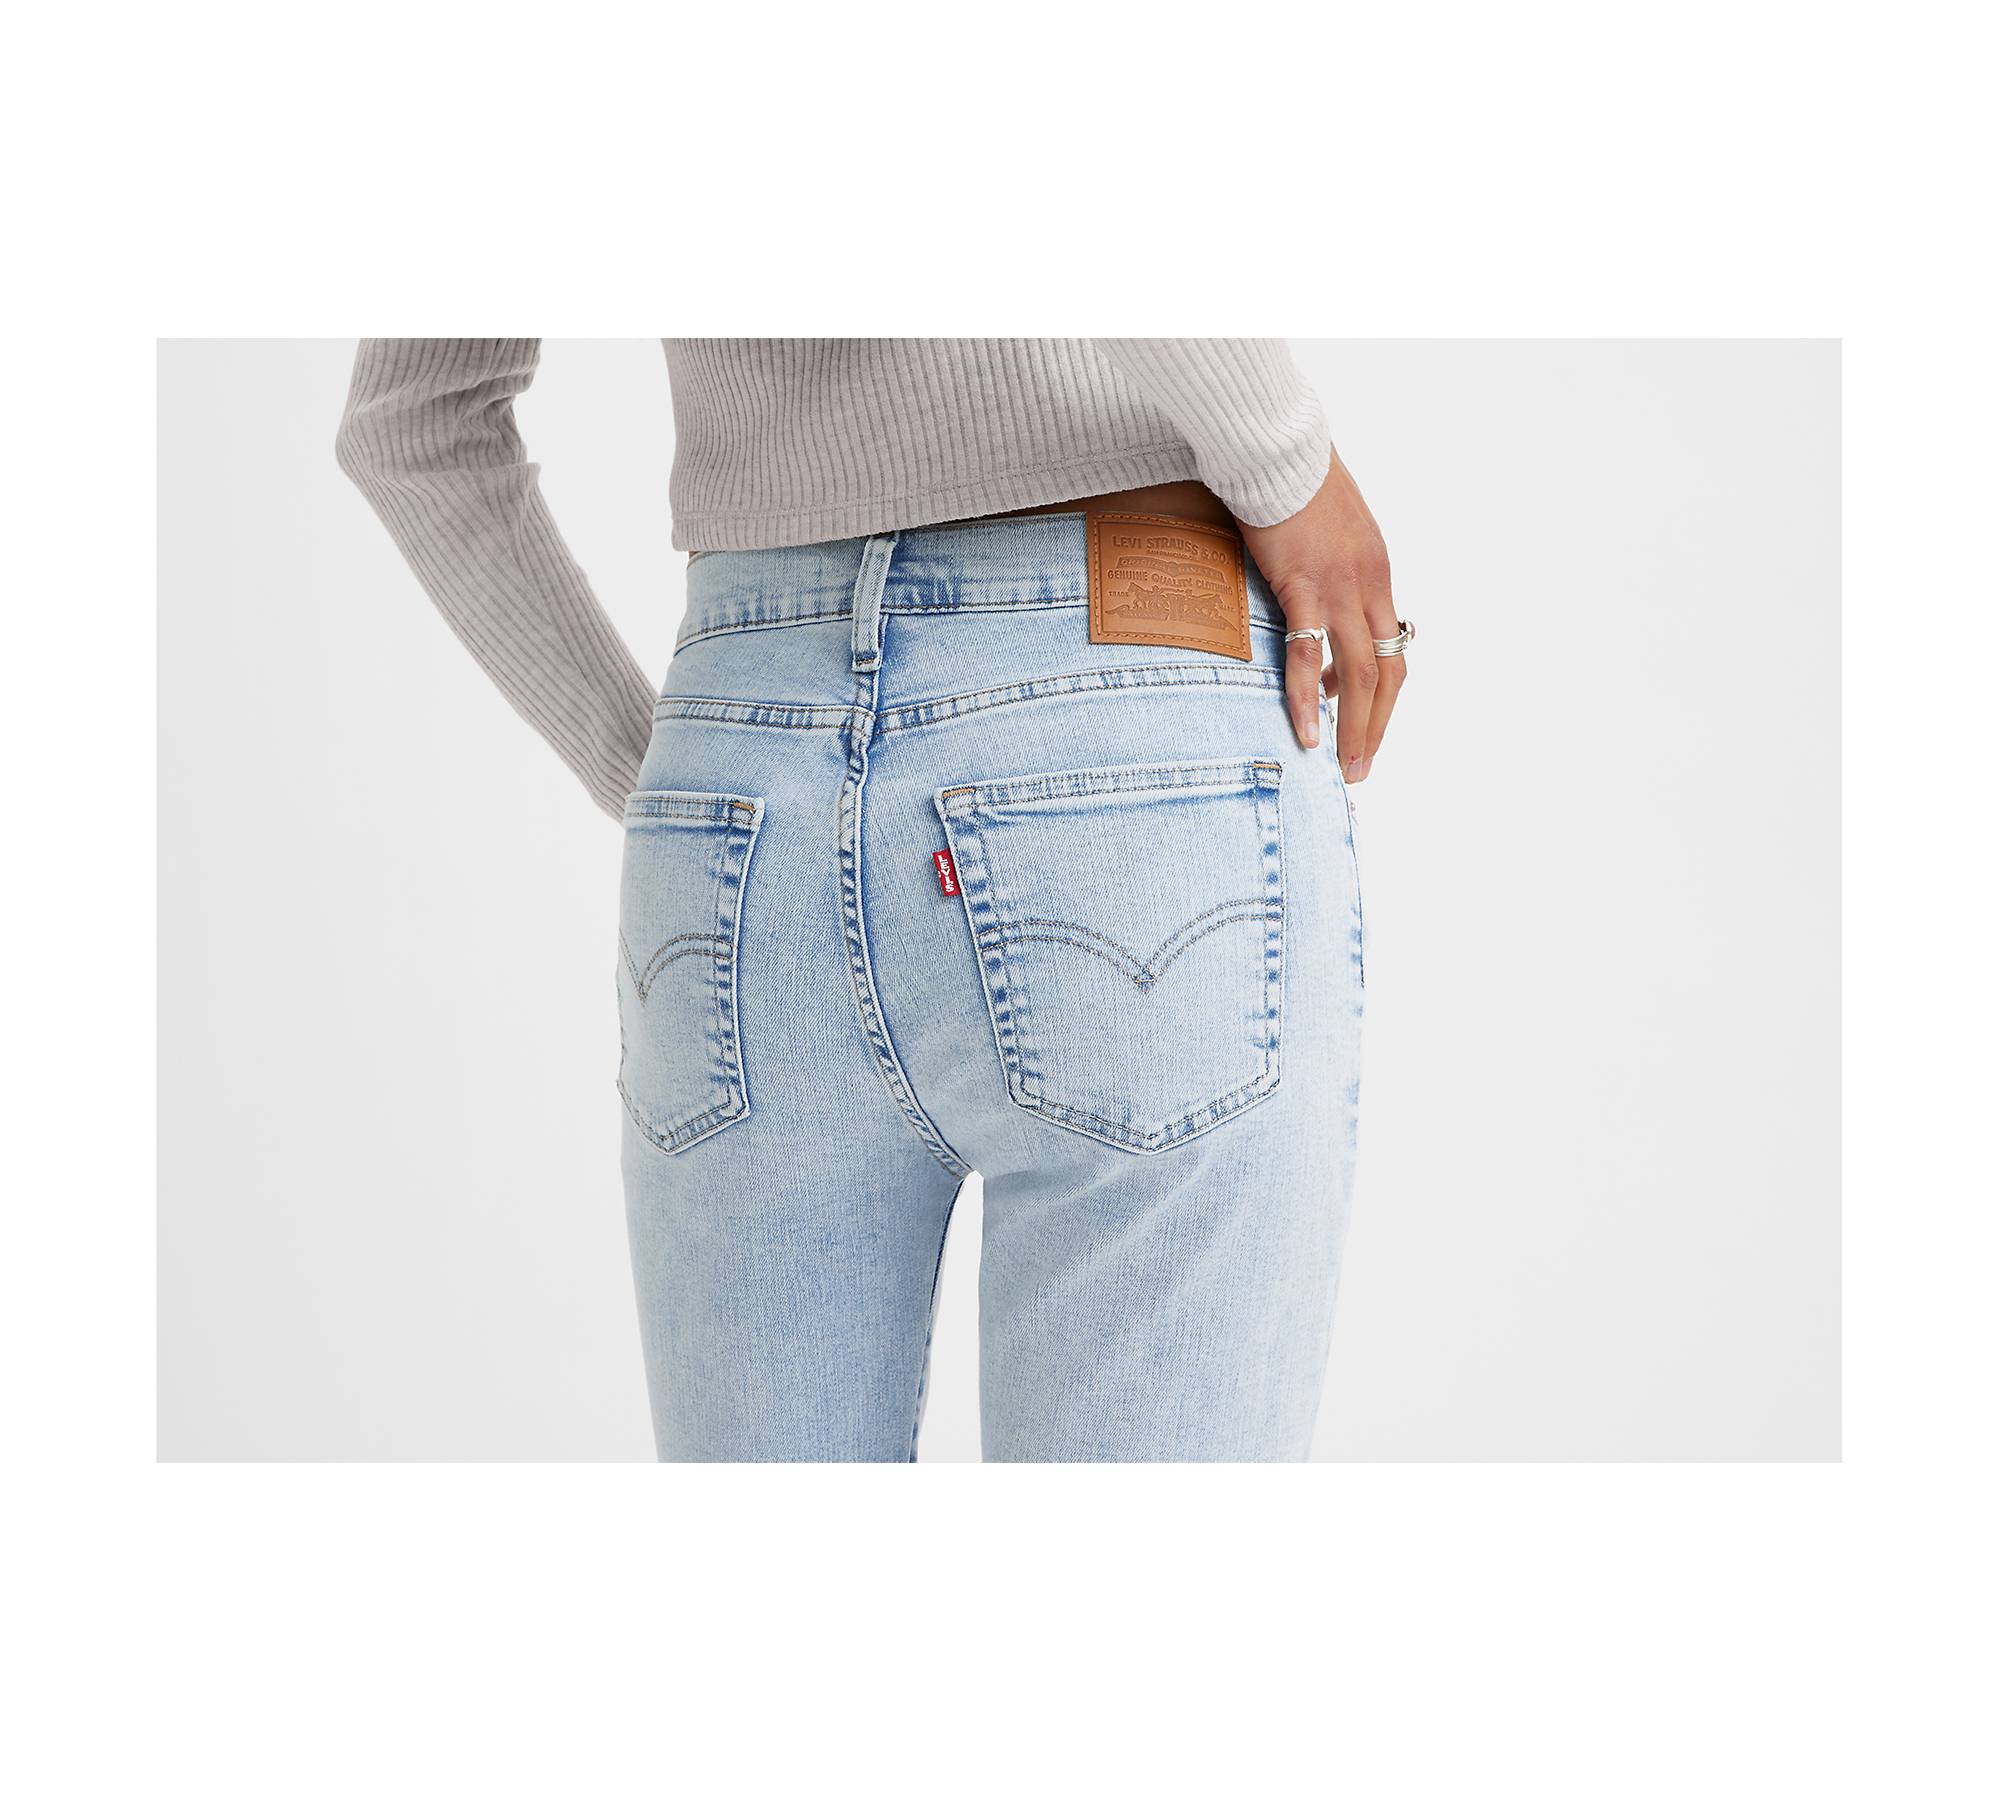 High Waist Pants, Trousers Jeans, Girls Jeans